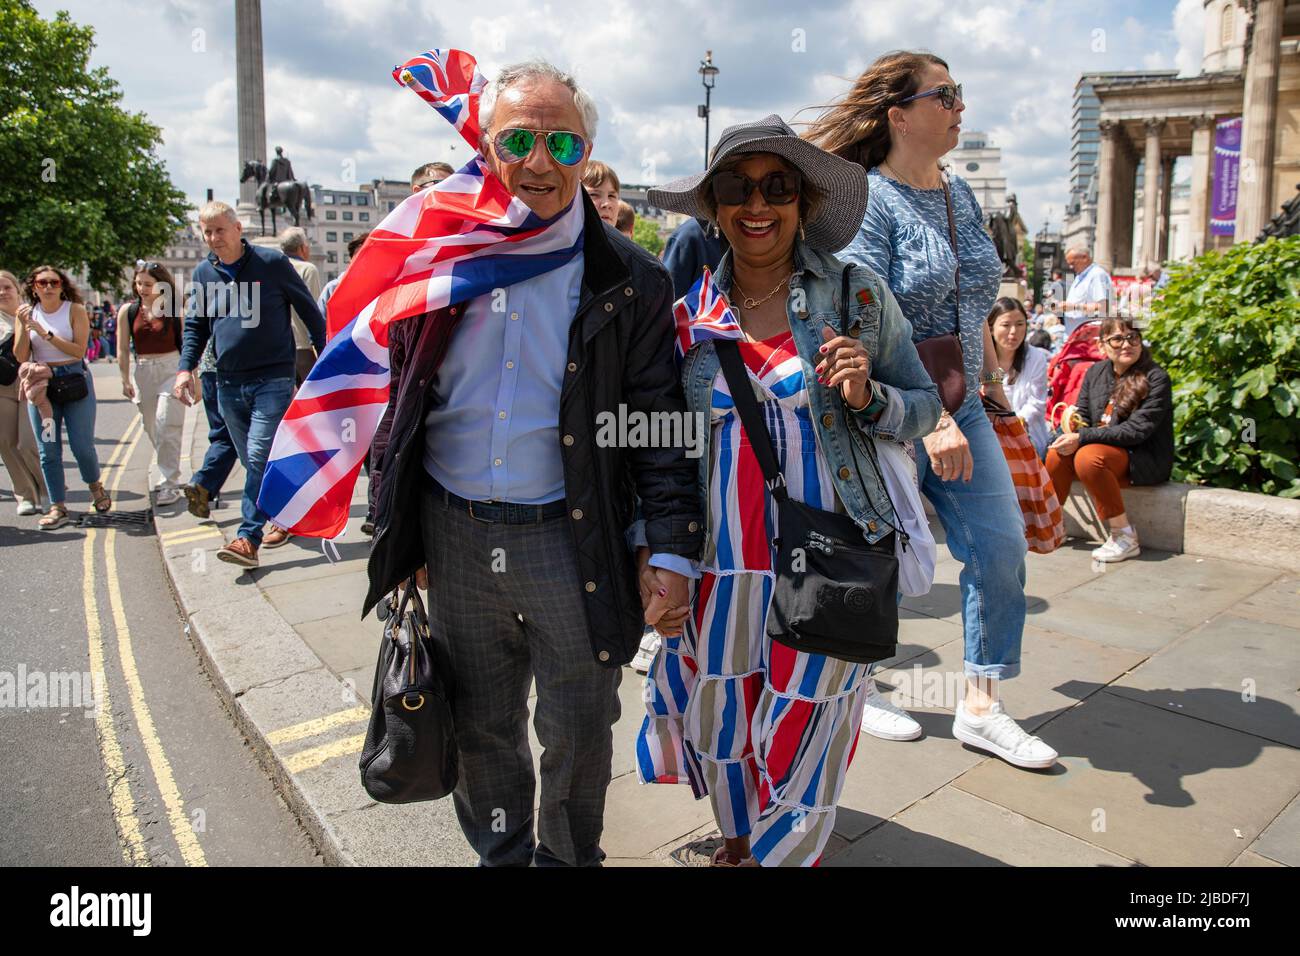 Westminster, London, UK. 2 June 2022. Royal fans congregate in the Mall and Trafalgar Square near Buckingham Palace to celebrate Her Majesty Queen Elizabeth II Platinum Jubilee. This is a weekend marking The Queen’s 70 years reign. Stock Photo